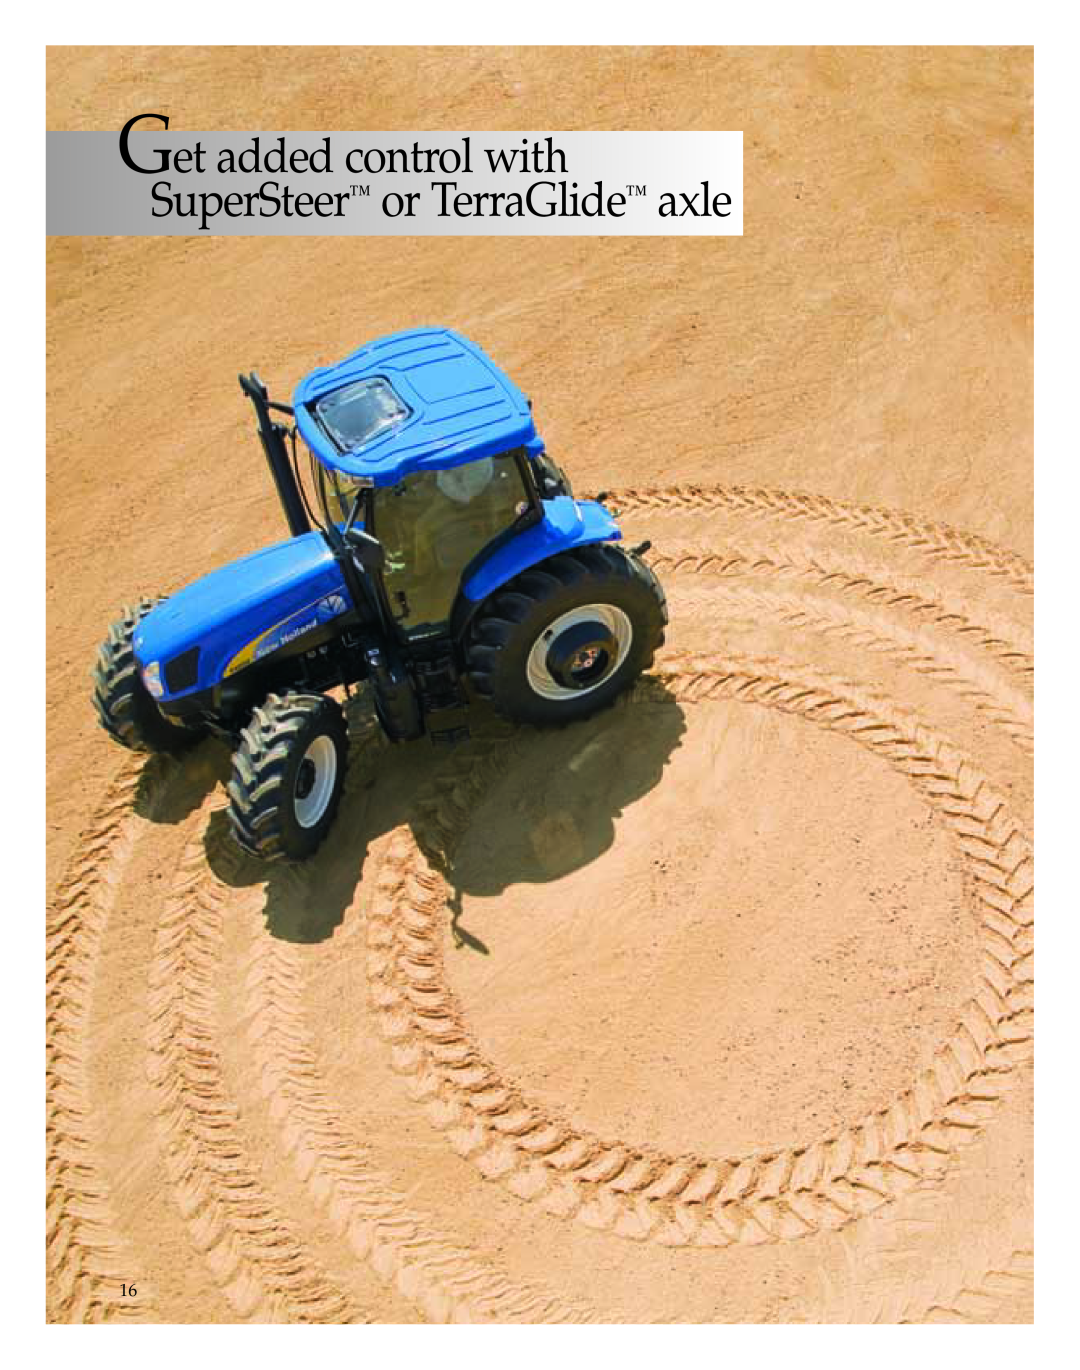 New Holland T6040, T6080, T6060, T6070, T6010 manual axle, Get added control with SuperSteer or TerraGlide 